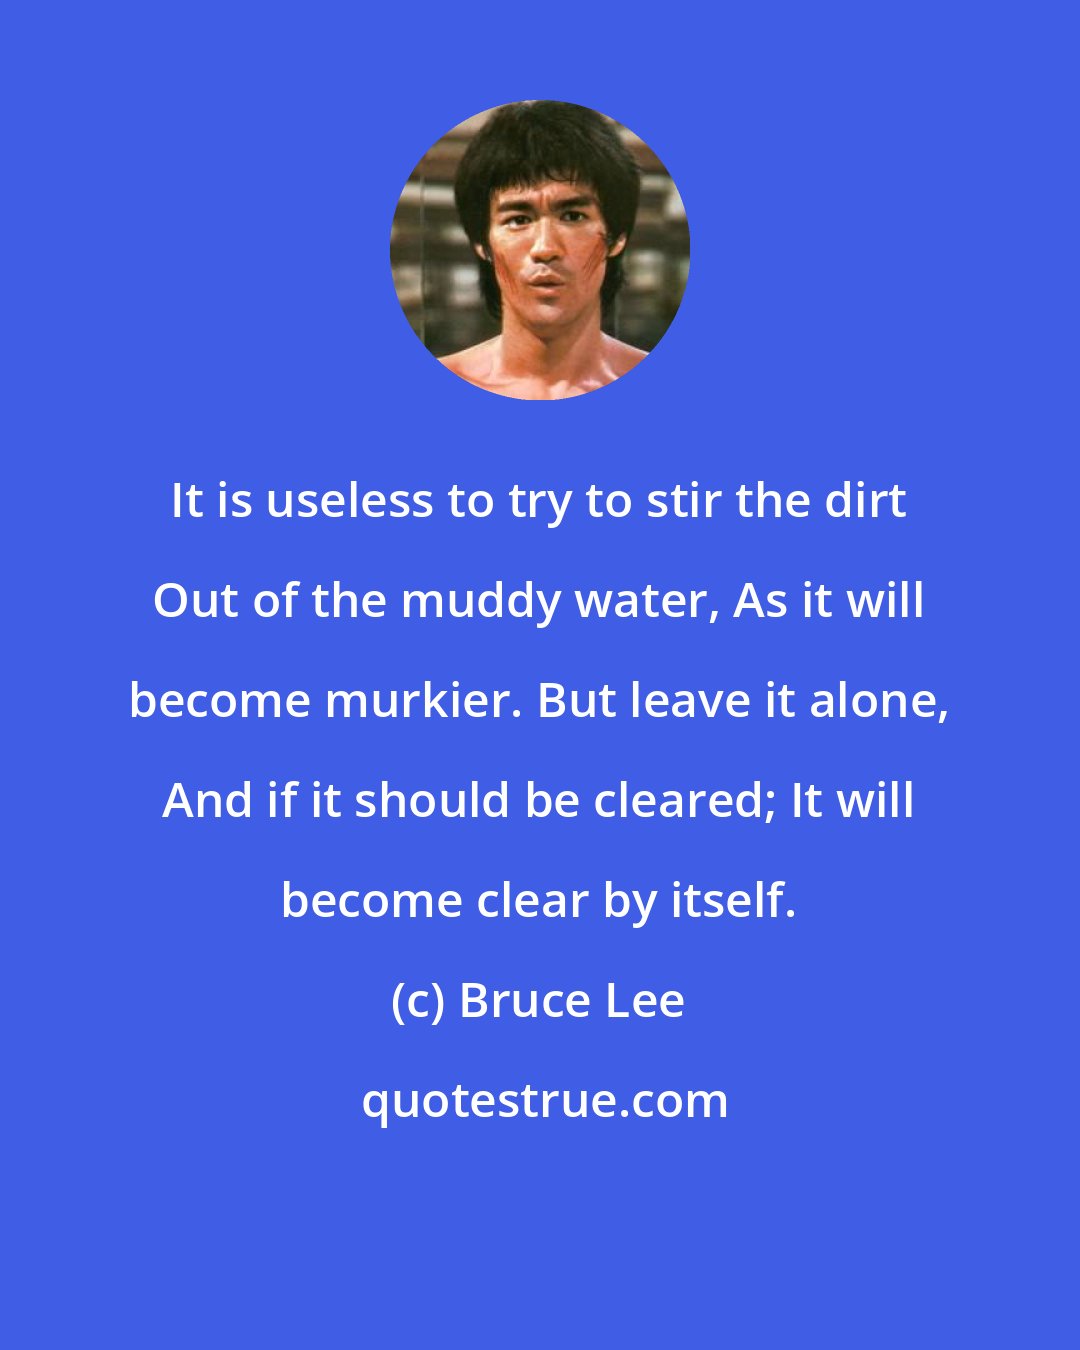 Bruce Lee: It is useless to try to stir the dirt Out of the muddy water, As it will become murkier. But leave it alone, And if it should be cleared; It will become clear by itself.